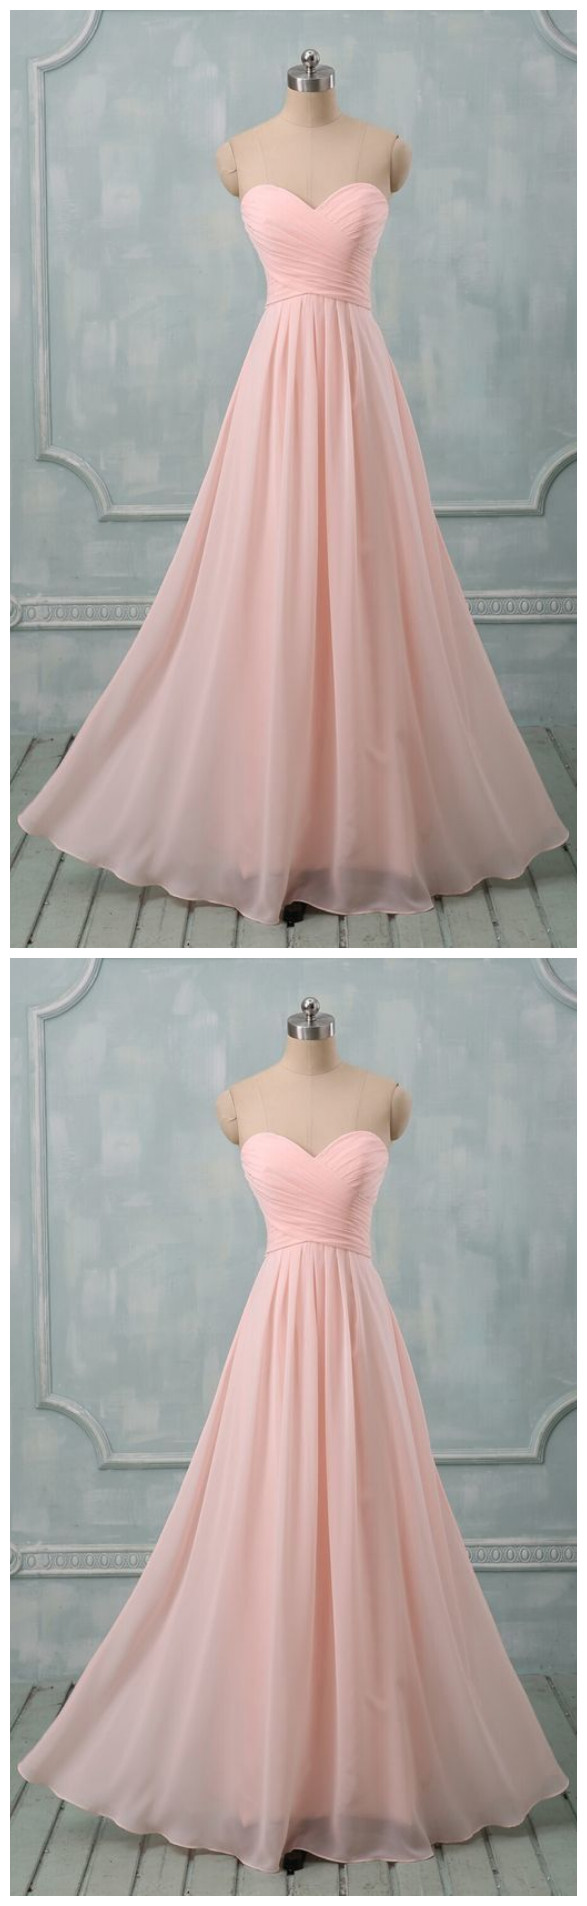 Prom Dresses>simple Pink Chiffon Party Dresses